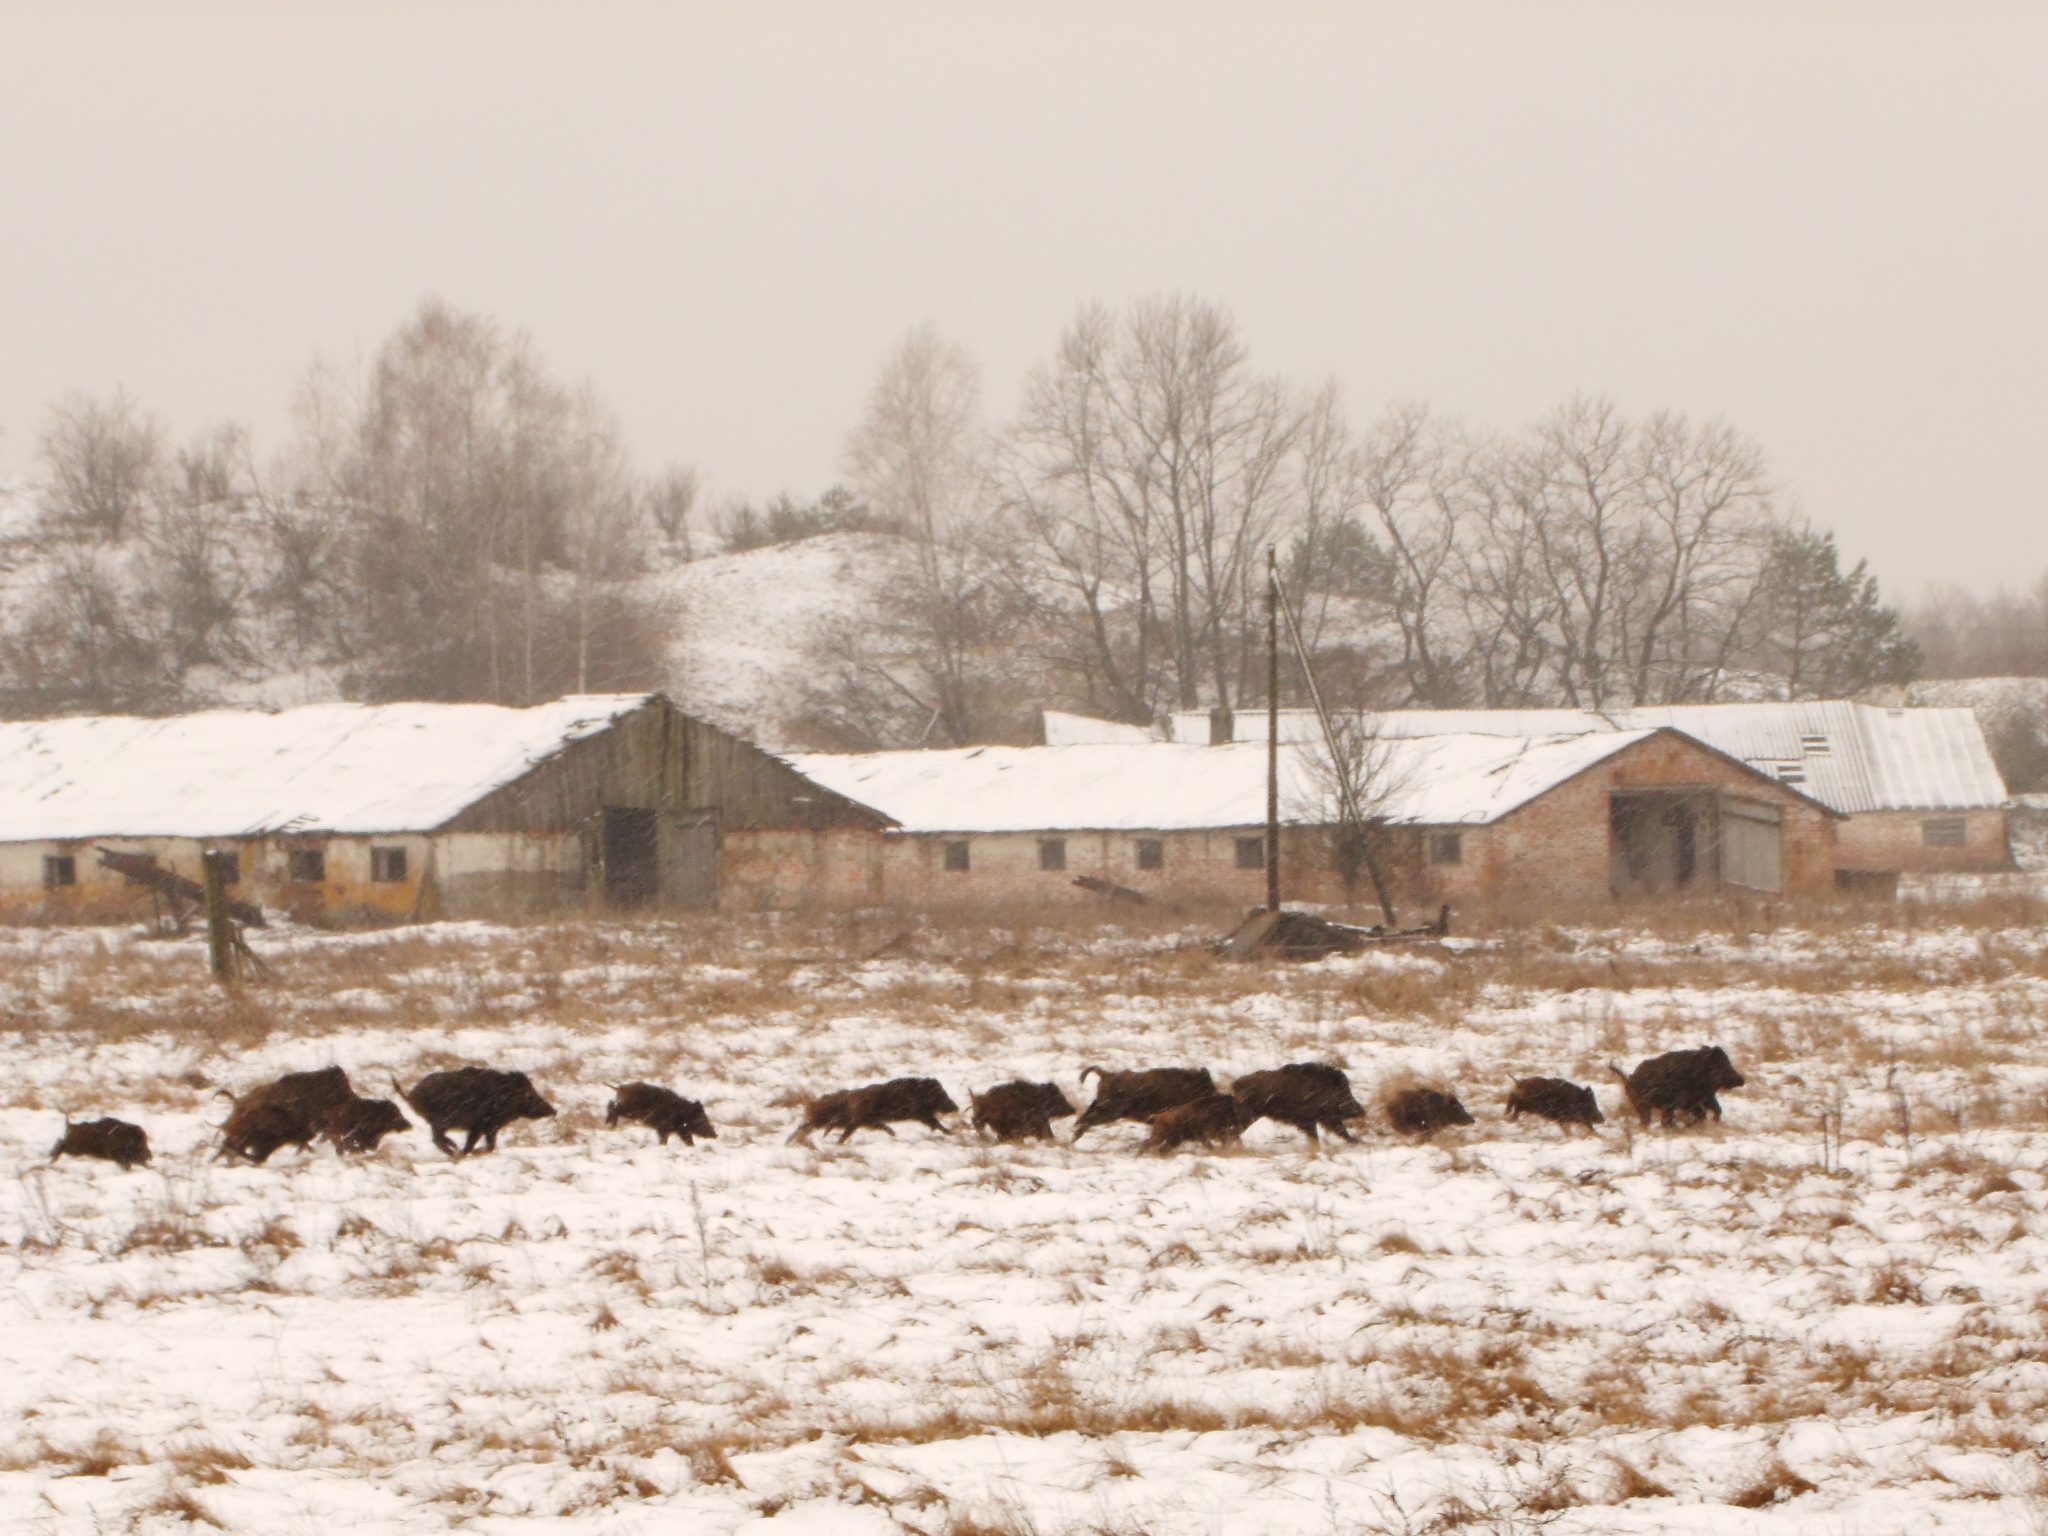 Tracking wildlife in Chernobyl: The emotional landscape of a disaster zone